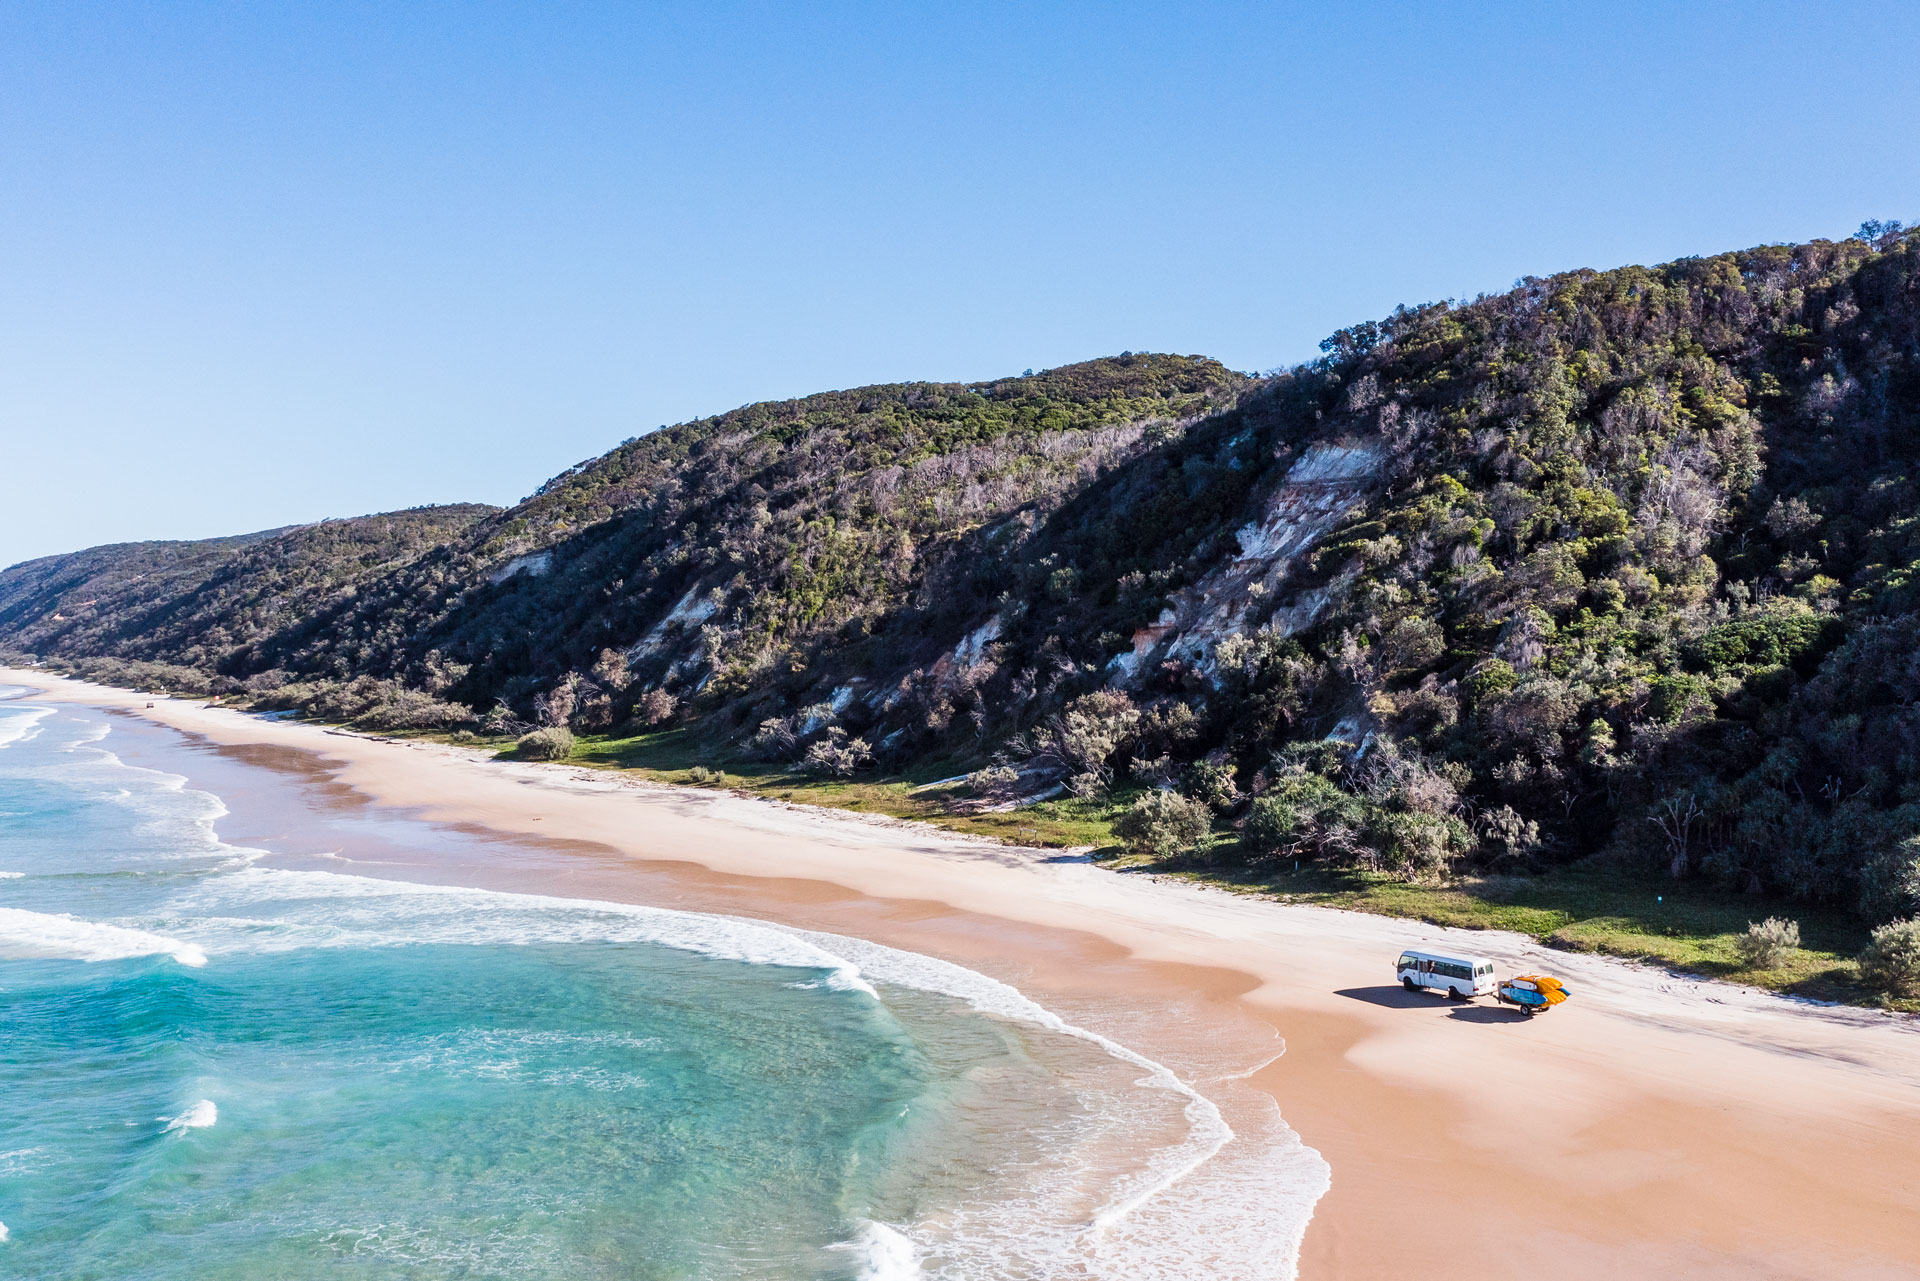 Noosa beach with mountains in the background and a car driving on the sand